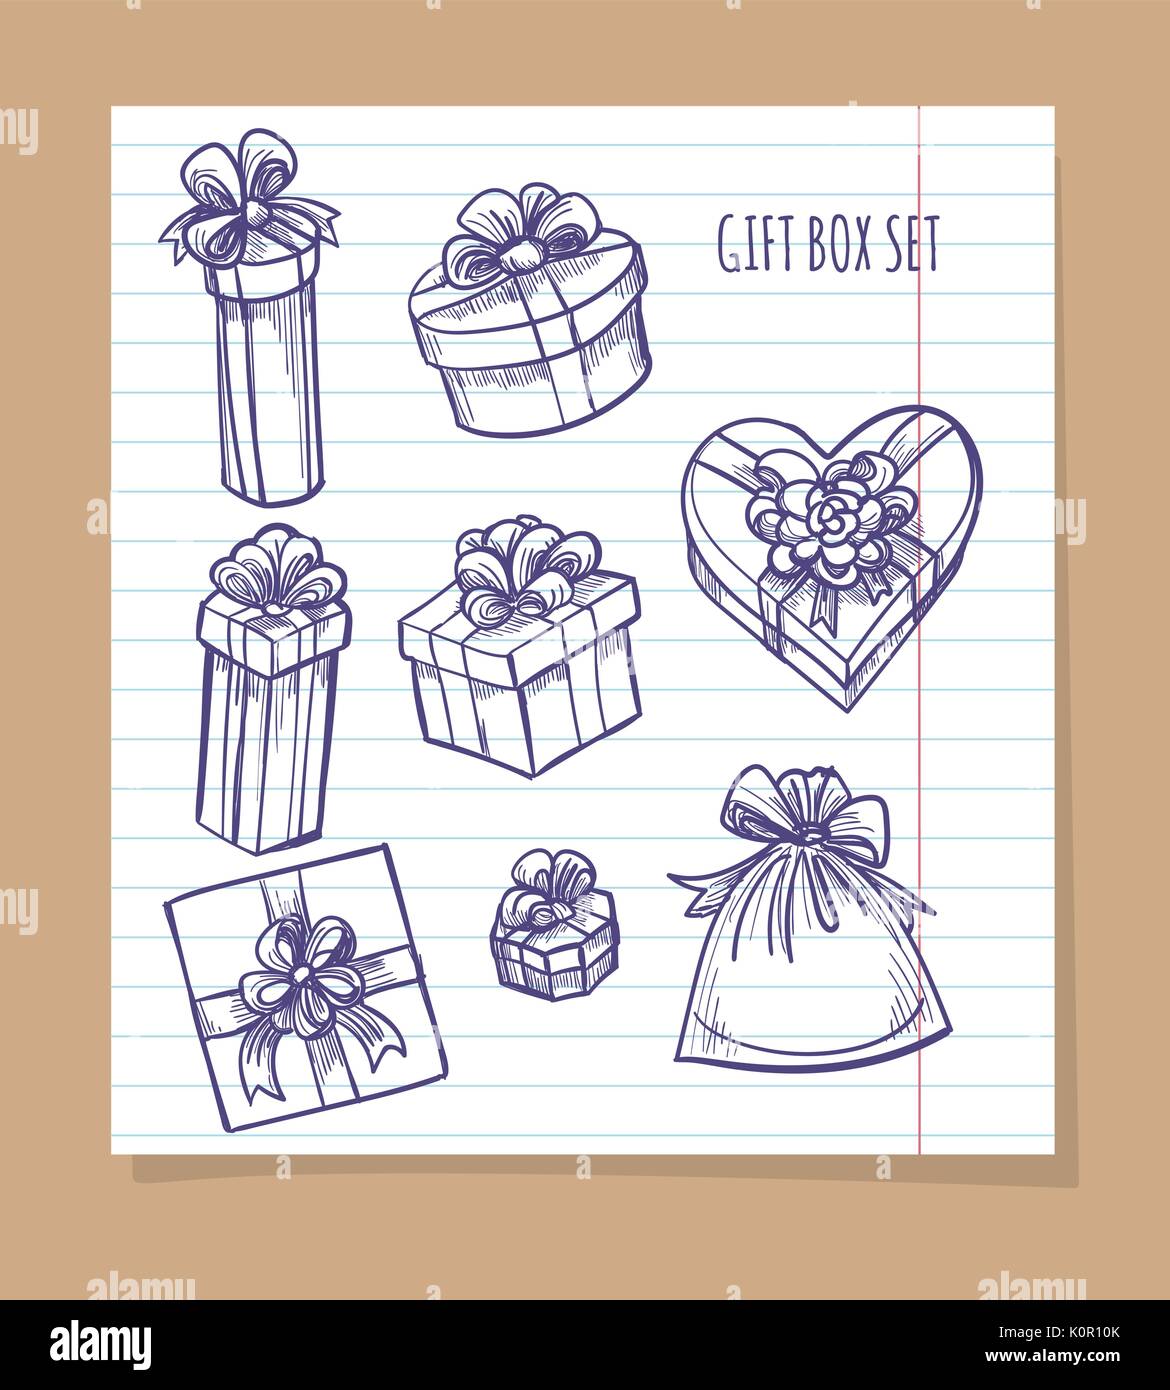 Gift box set on line notebook page vector Stock Vector